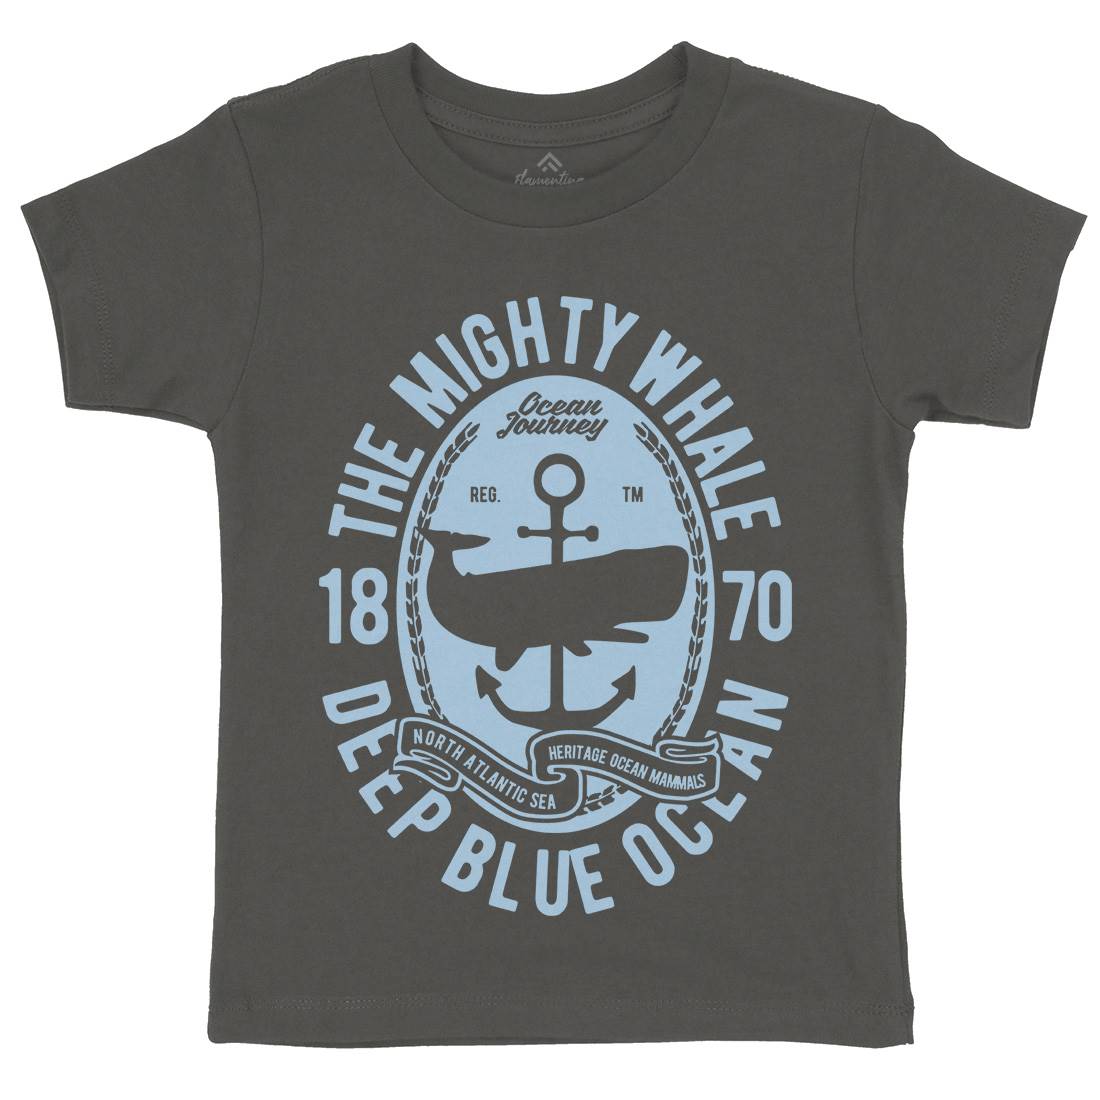 The Mighty Whale Kids Crew Neck T-Shirt Navy B466